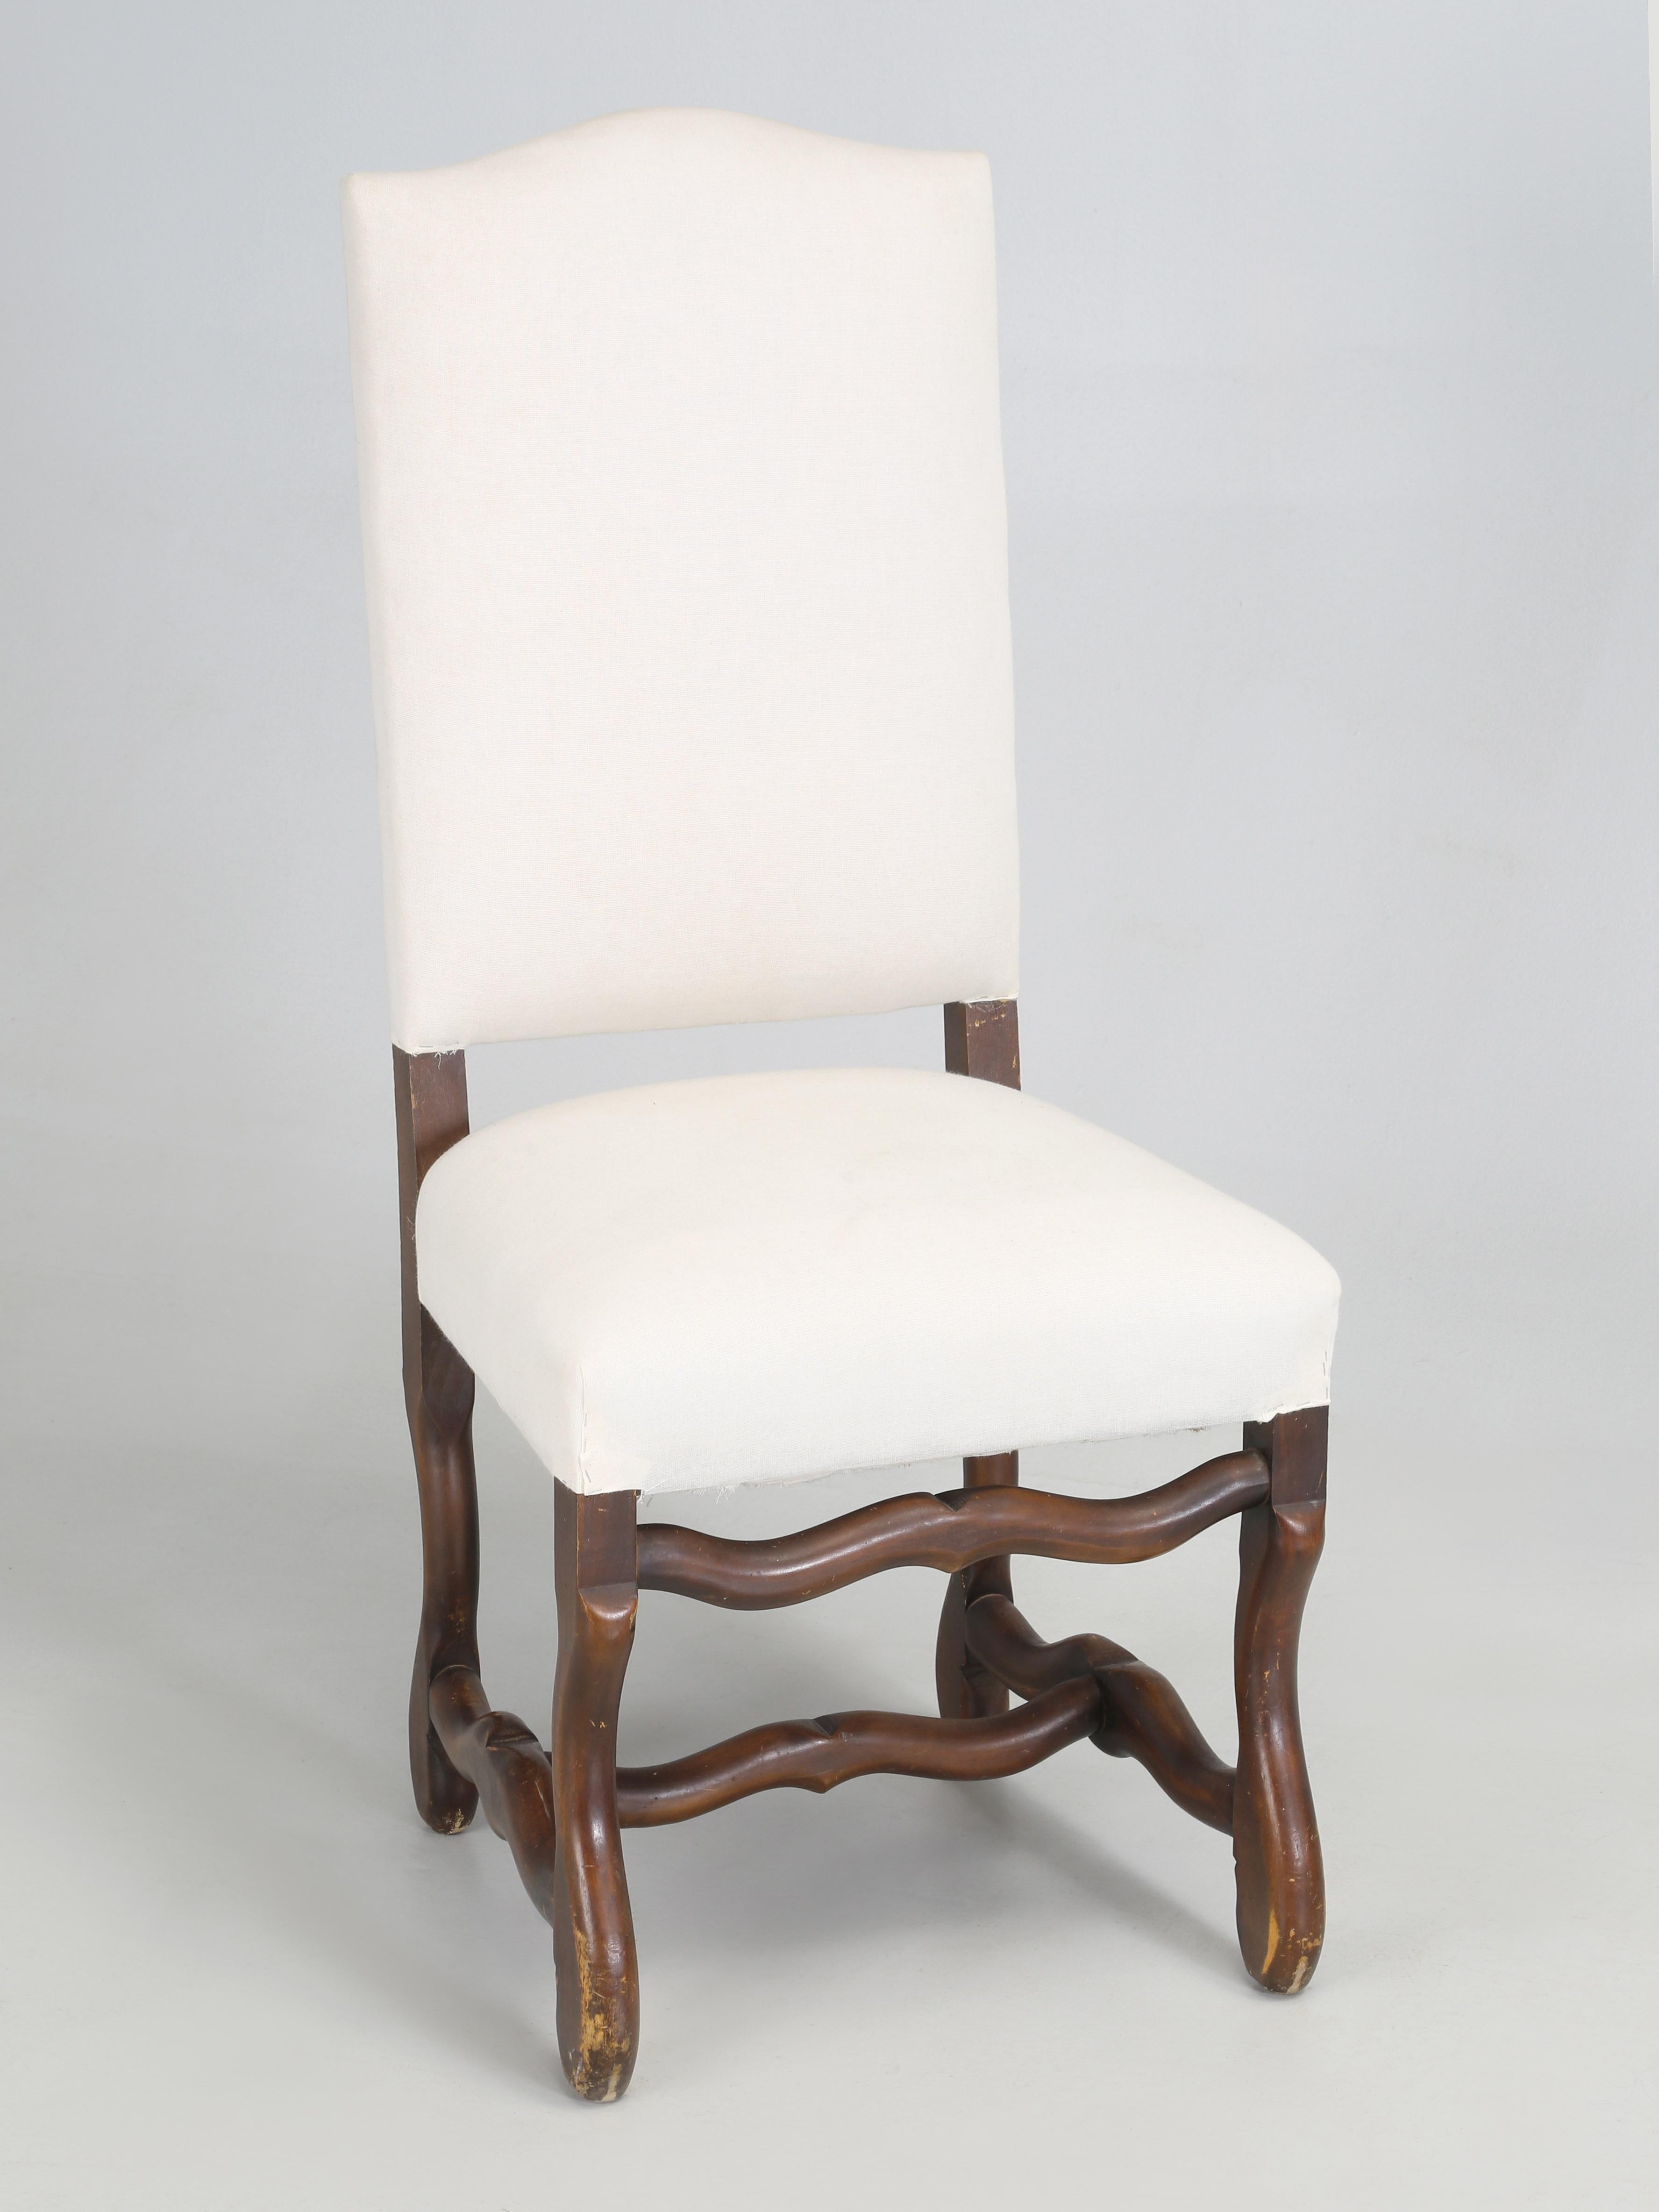 Vintage French Dining Chairs in the style of Os De Mouton, which translate to sheeps horn. Our Old Plank upholstery department disassembled the chairs and re-tied the coil springs 8-ways by hand and used horsehair for padding. What we did not do, is